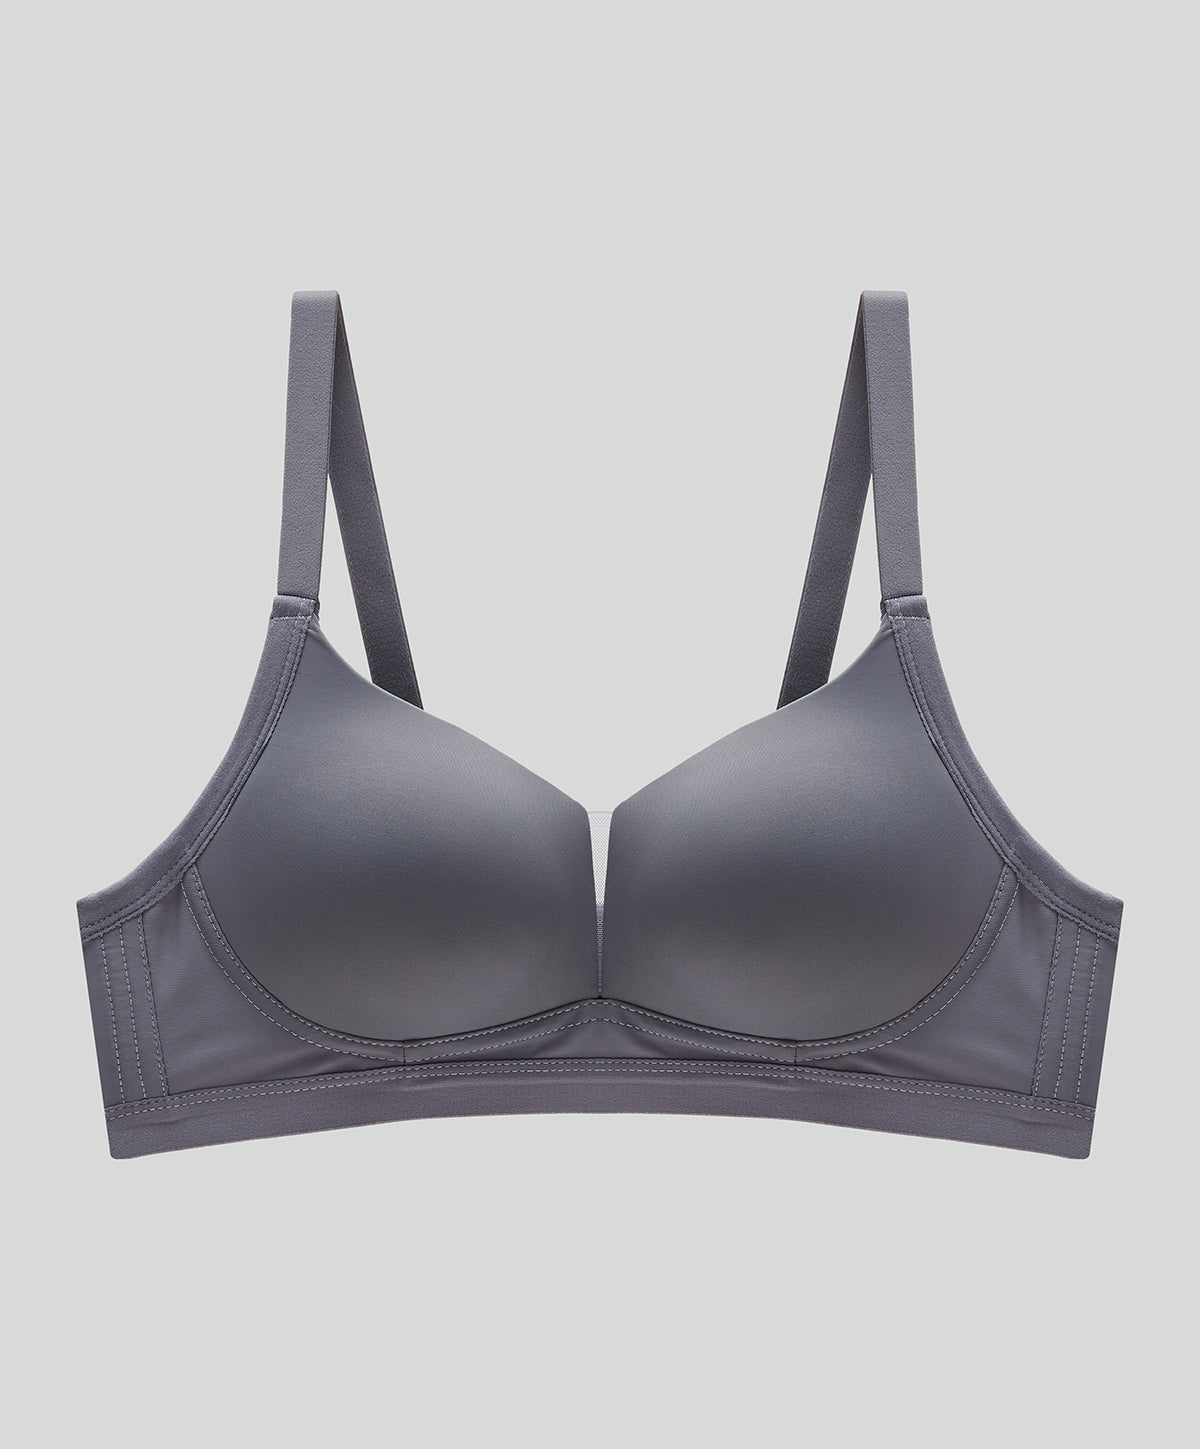 Maidenform Girls' Molded Triangle Pullover Padded Comfort Bra - Gray 36A